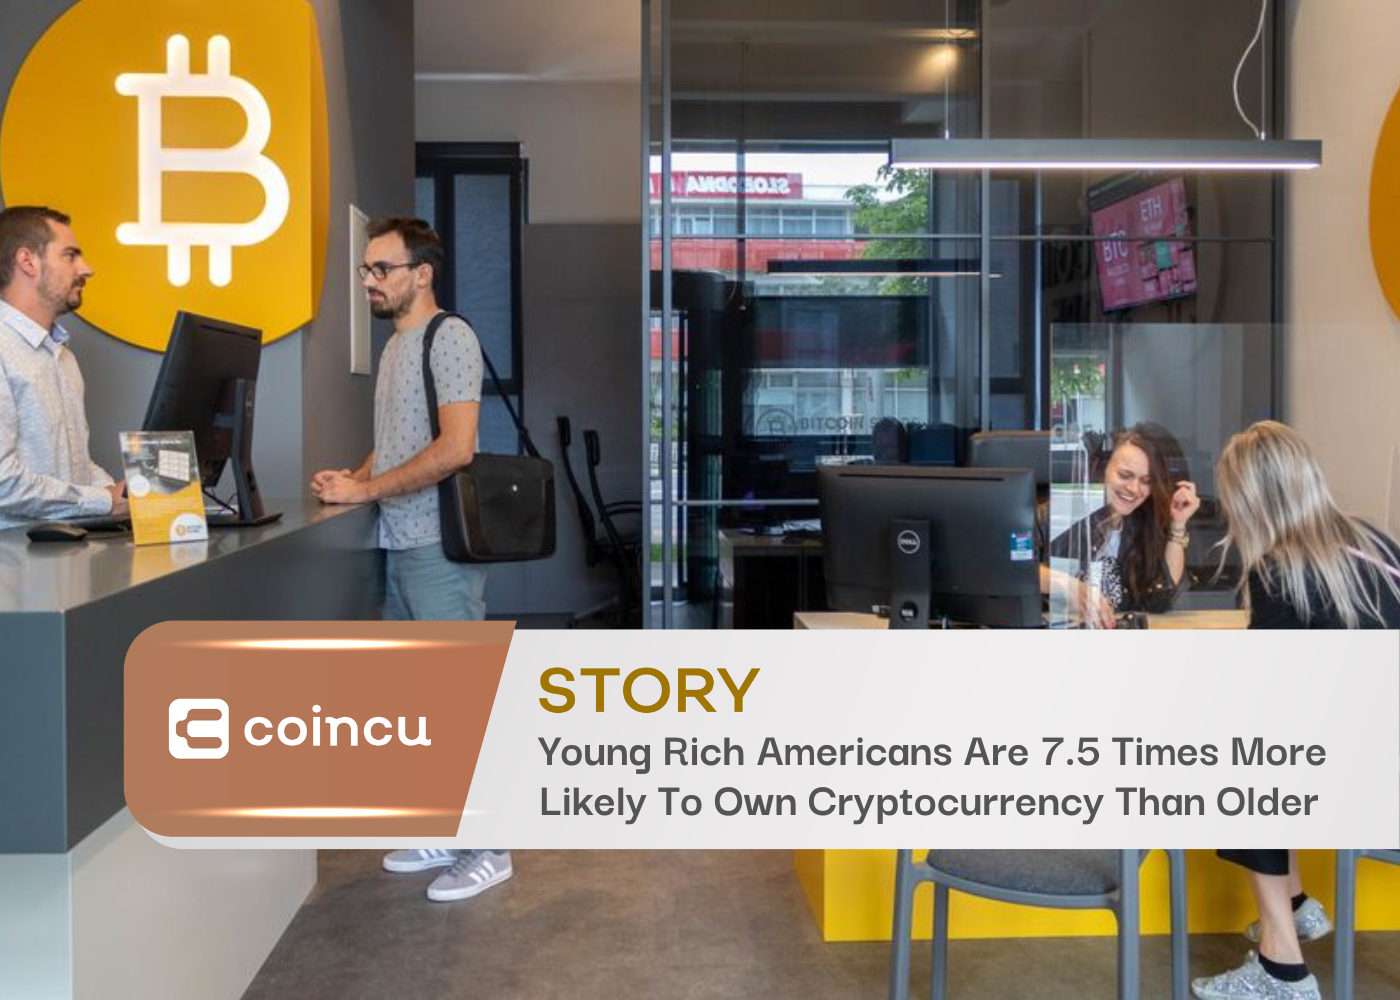 Report: Young Rich Americans Are 7.5 Times More Likely To Own Cryptocurrency Than Older Investors